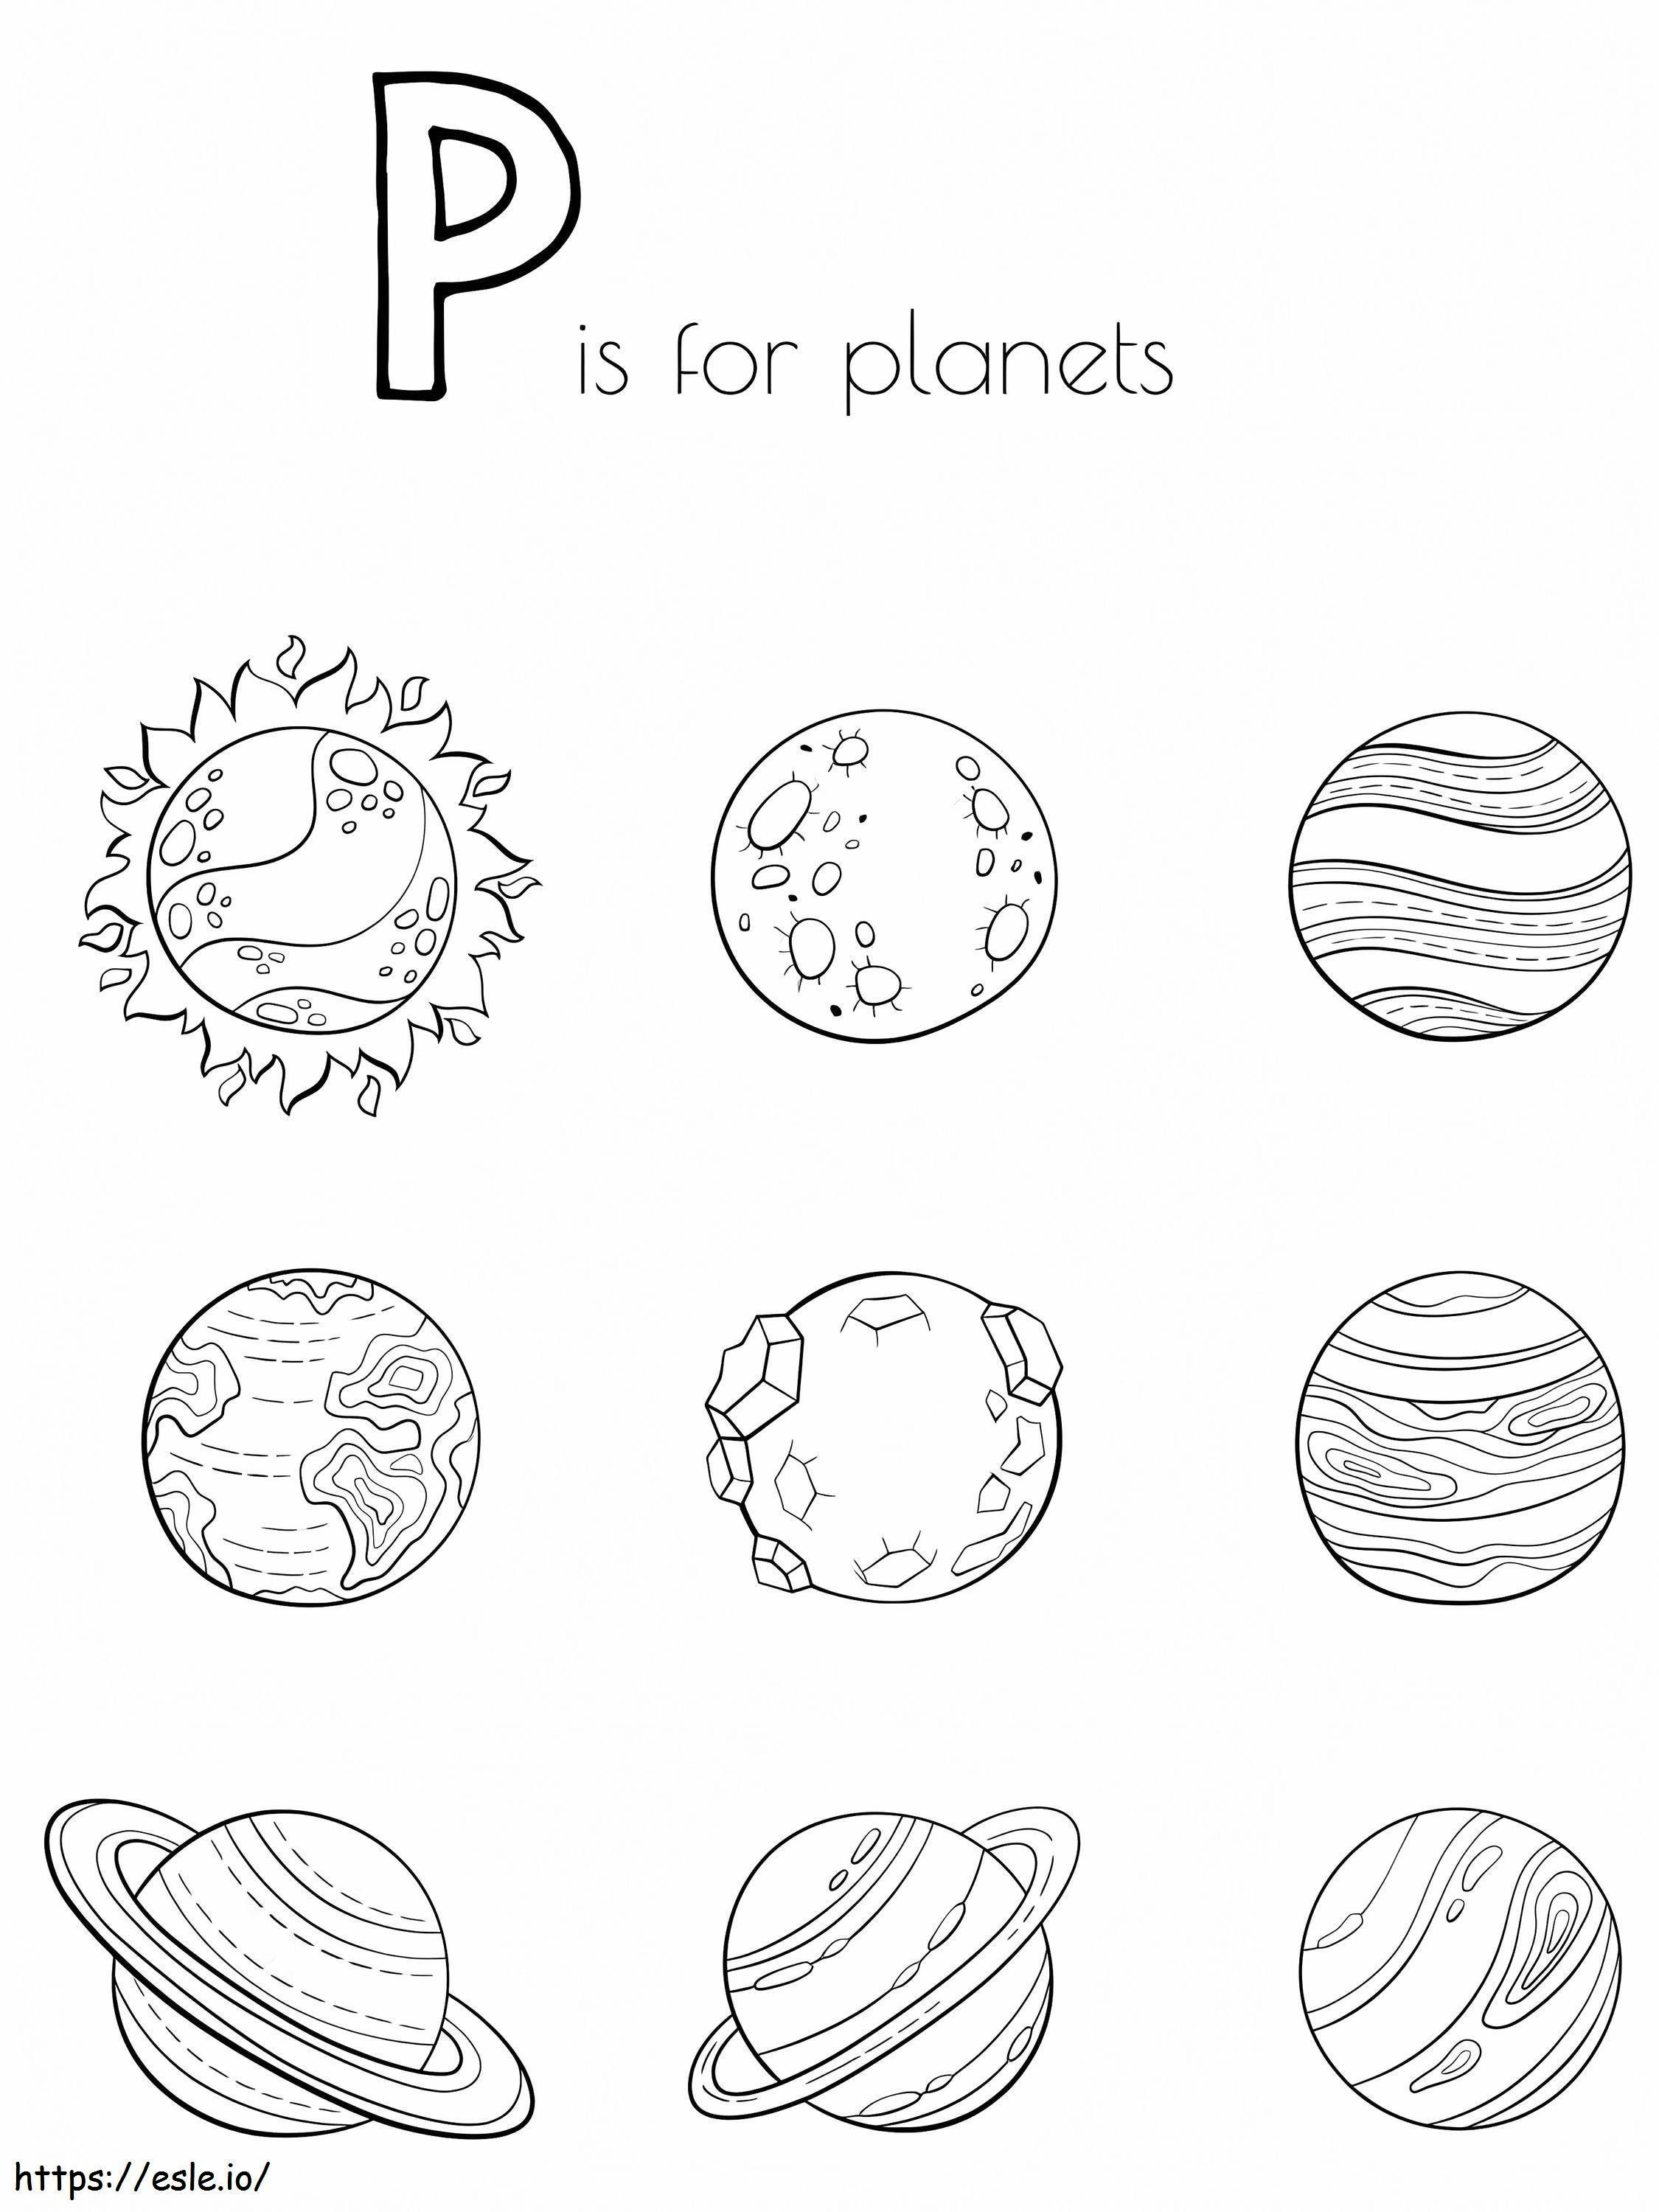 P Is For Planets coloring page